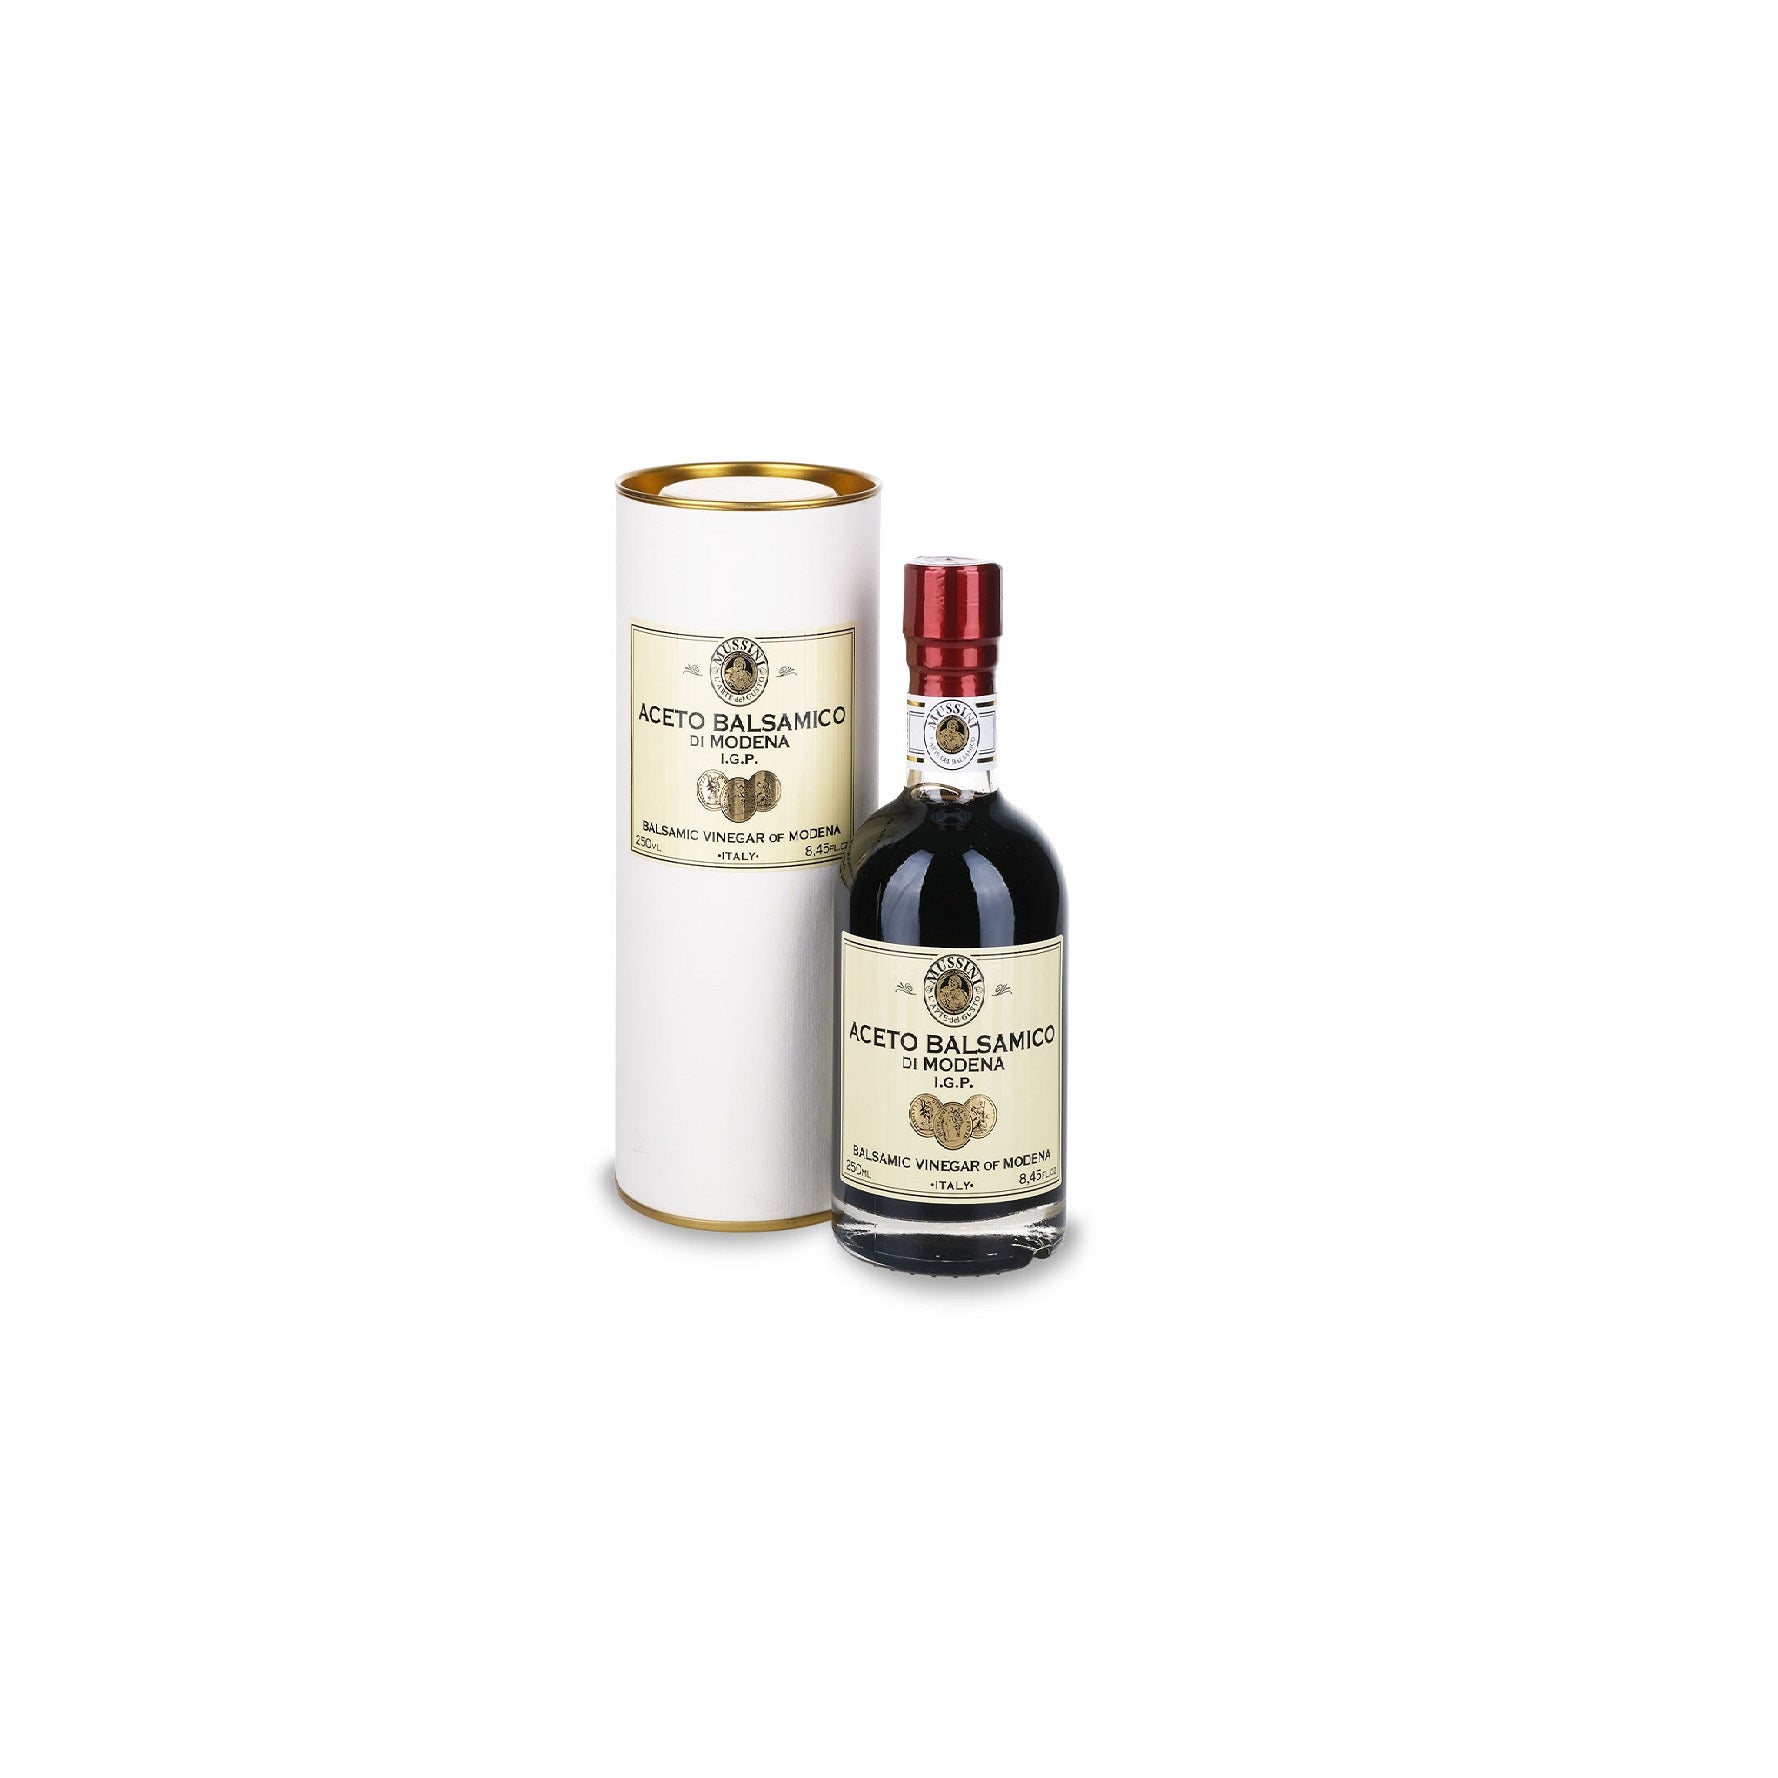 Aceto Balsamico - Balsamic Vinegar from Modena "Mussini" "Red Seal"